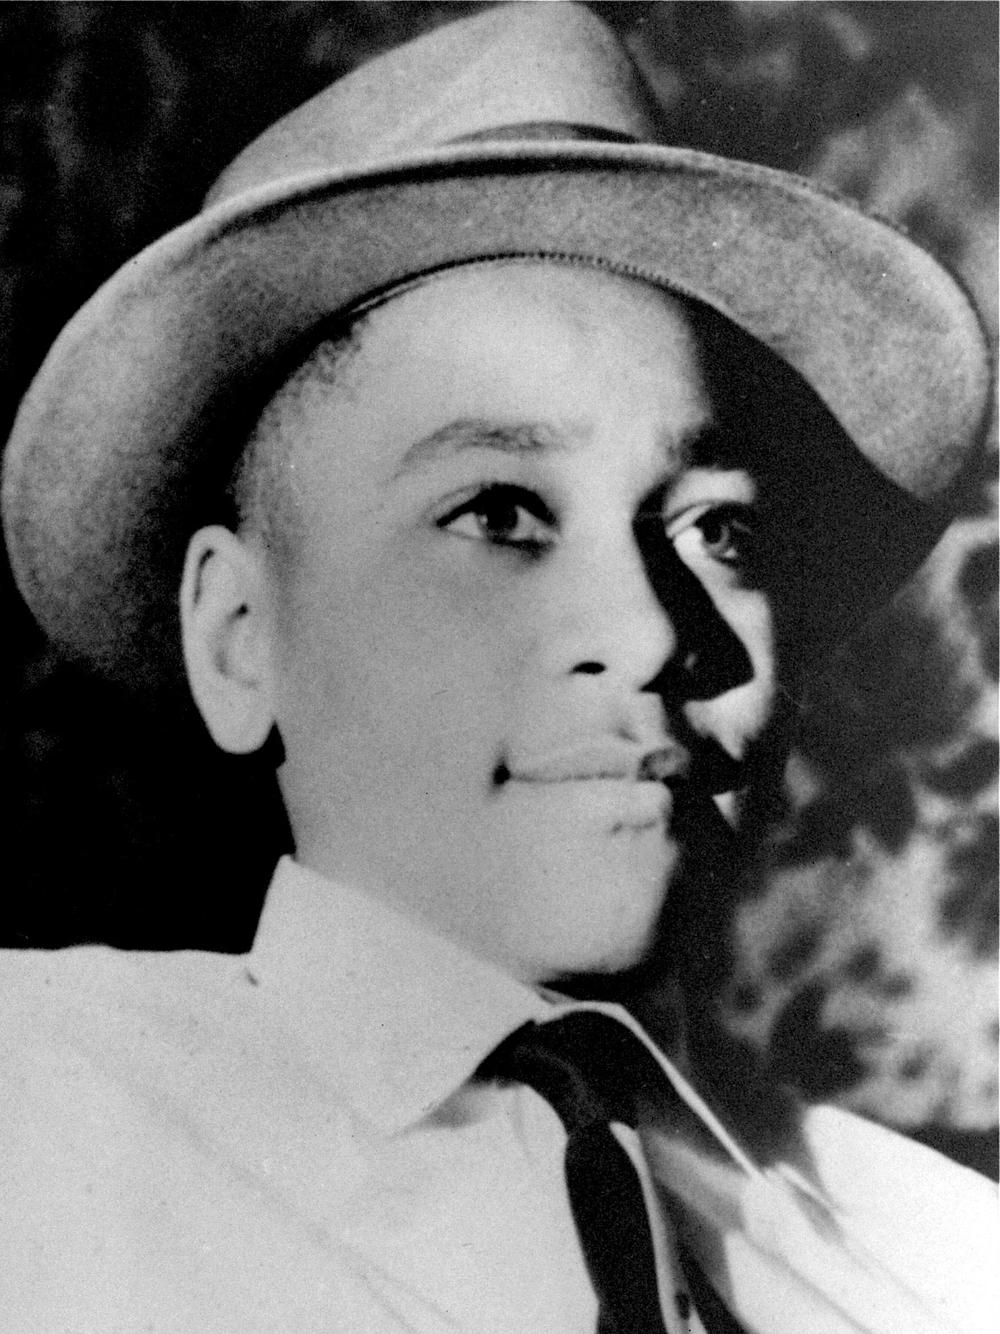 This undated photo shows Emmett Till at 14 years old.